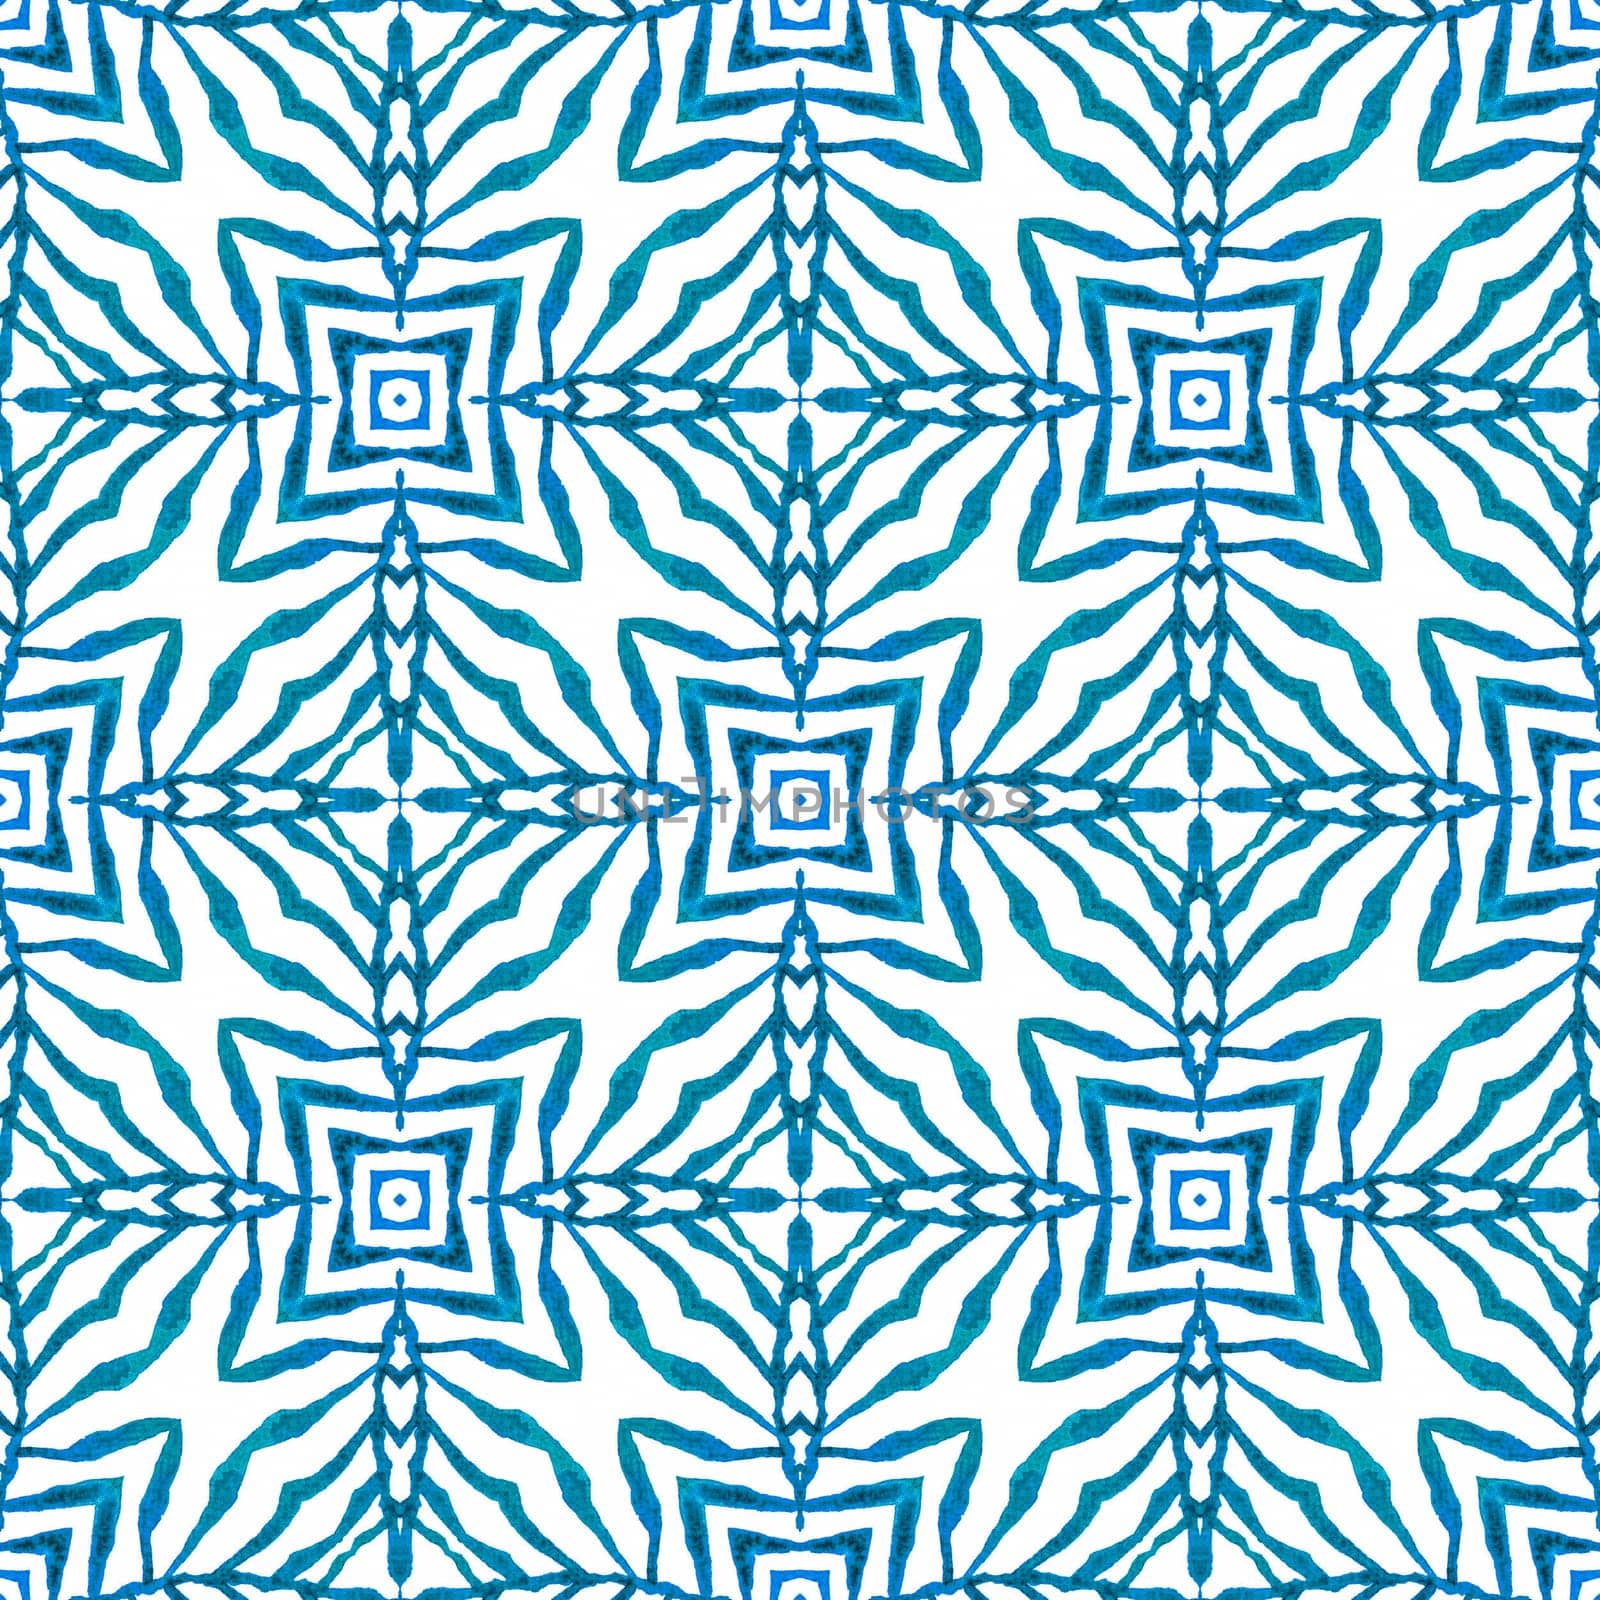 Textile ready positive print, swimwear fabric, wallpaper, wrapping. Blue unique boho chic summer design. Exotic seamless pattern. Summer exotic seamless border.